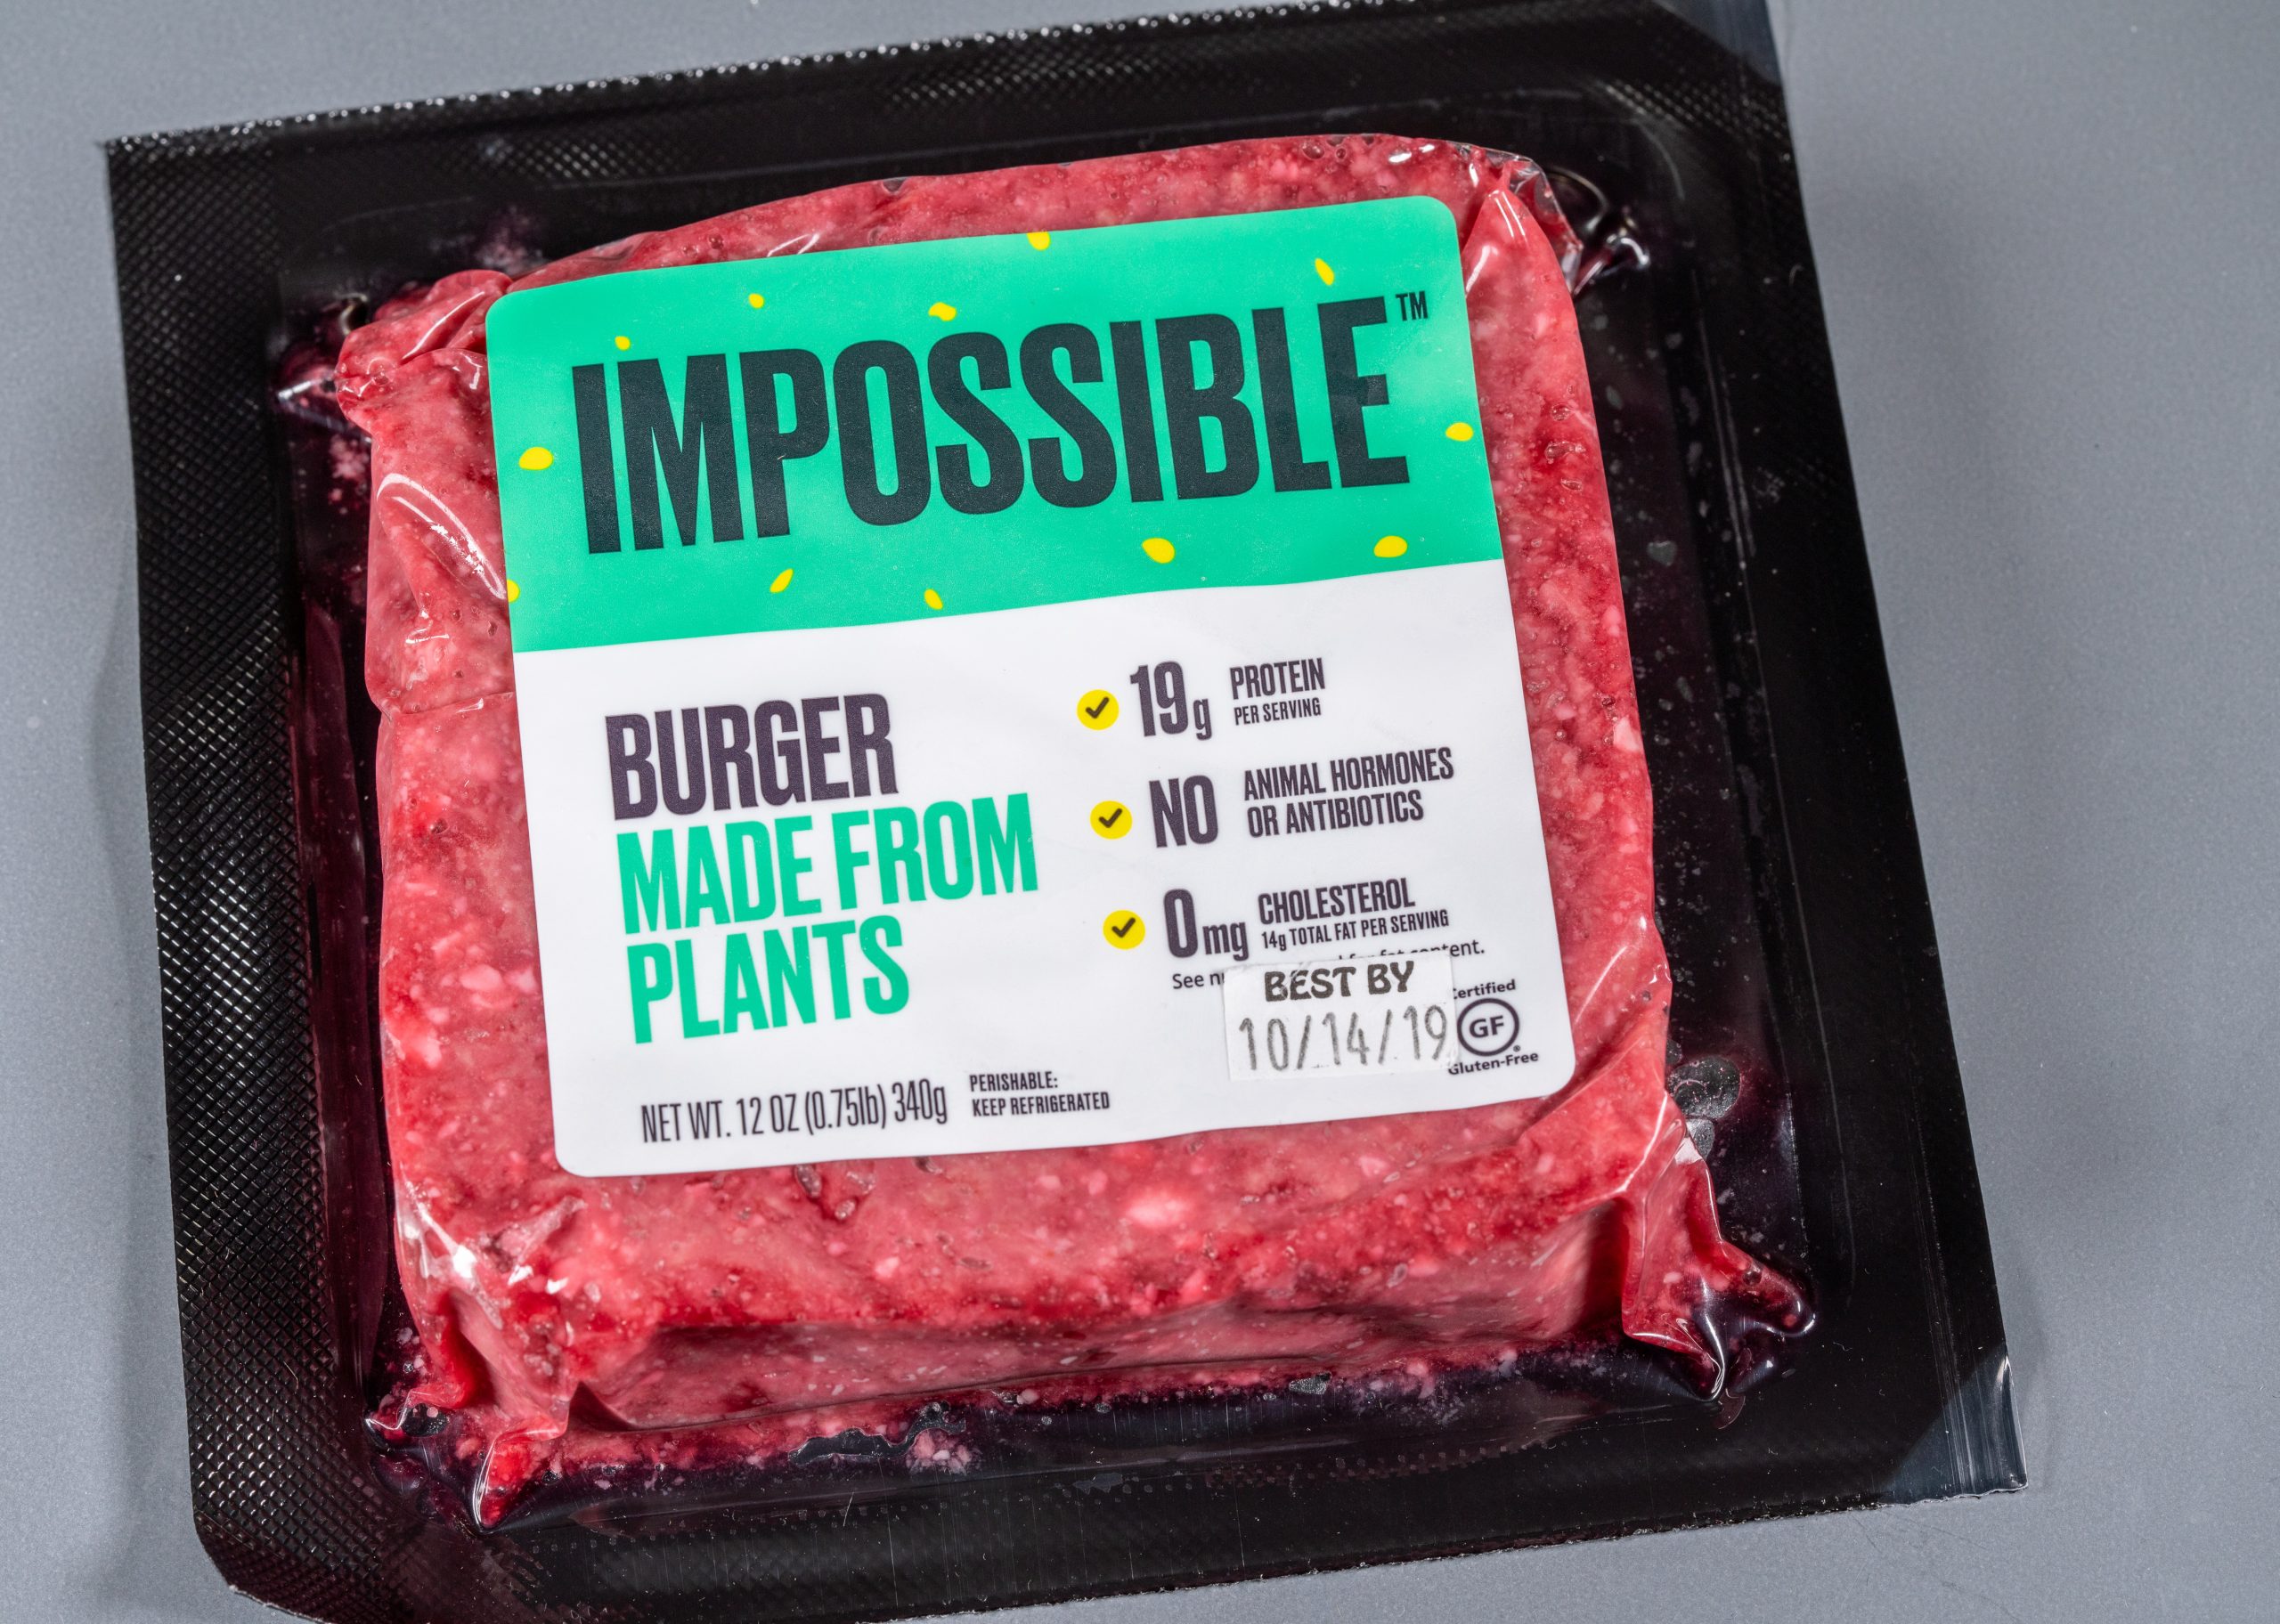 substitute meat products - https://depositphotos.com/312551700/stock-photo-impossible-plant-based-burger-package.html